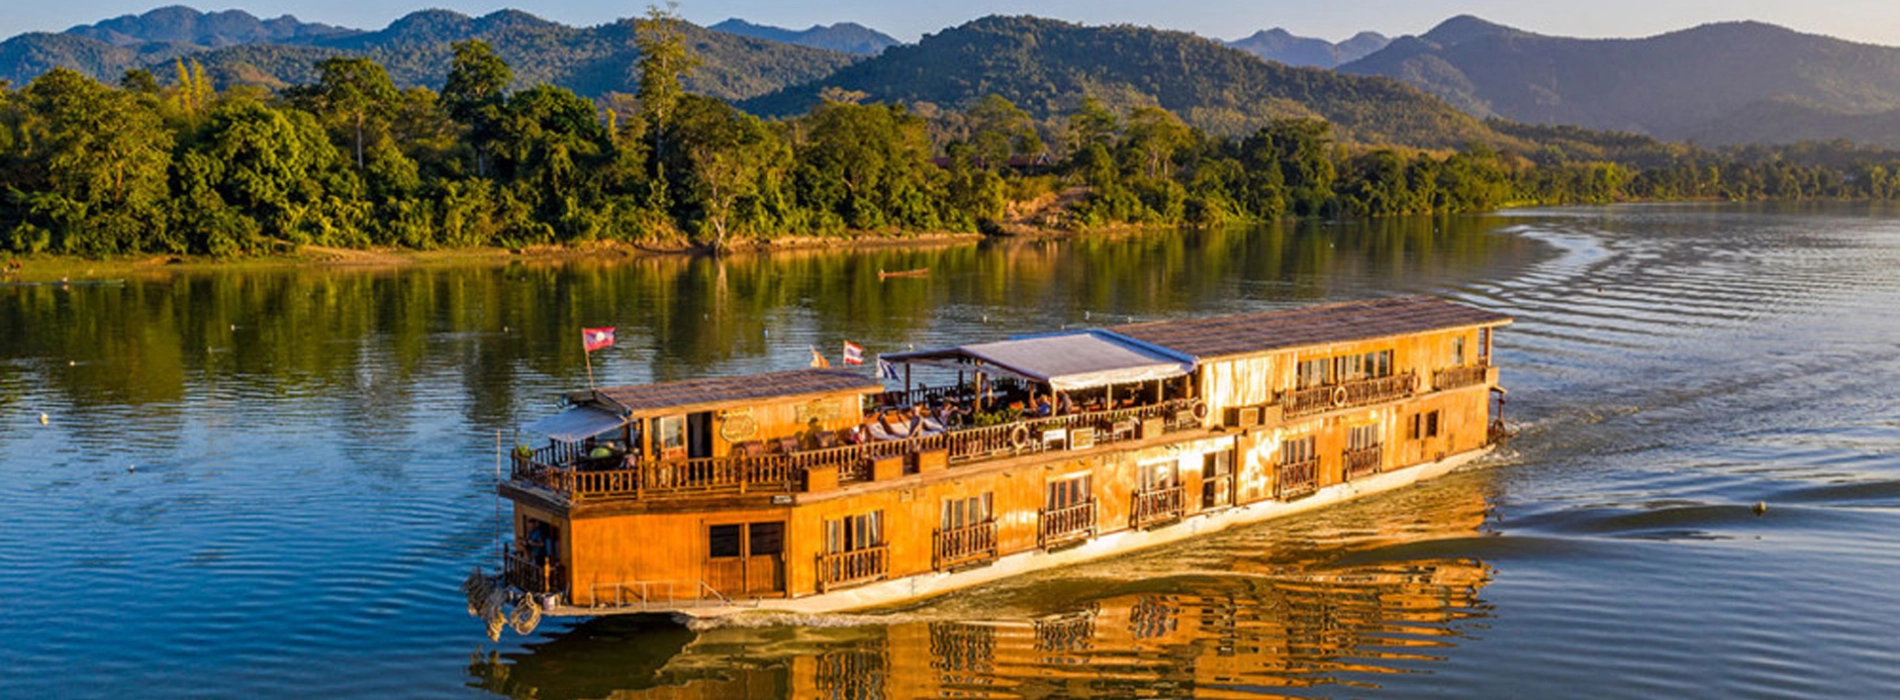 What you need to know about cruise on the Mekong River in Laos